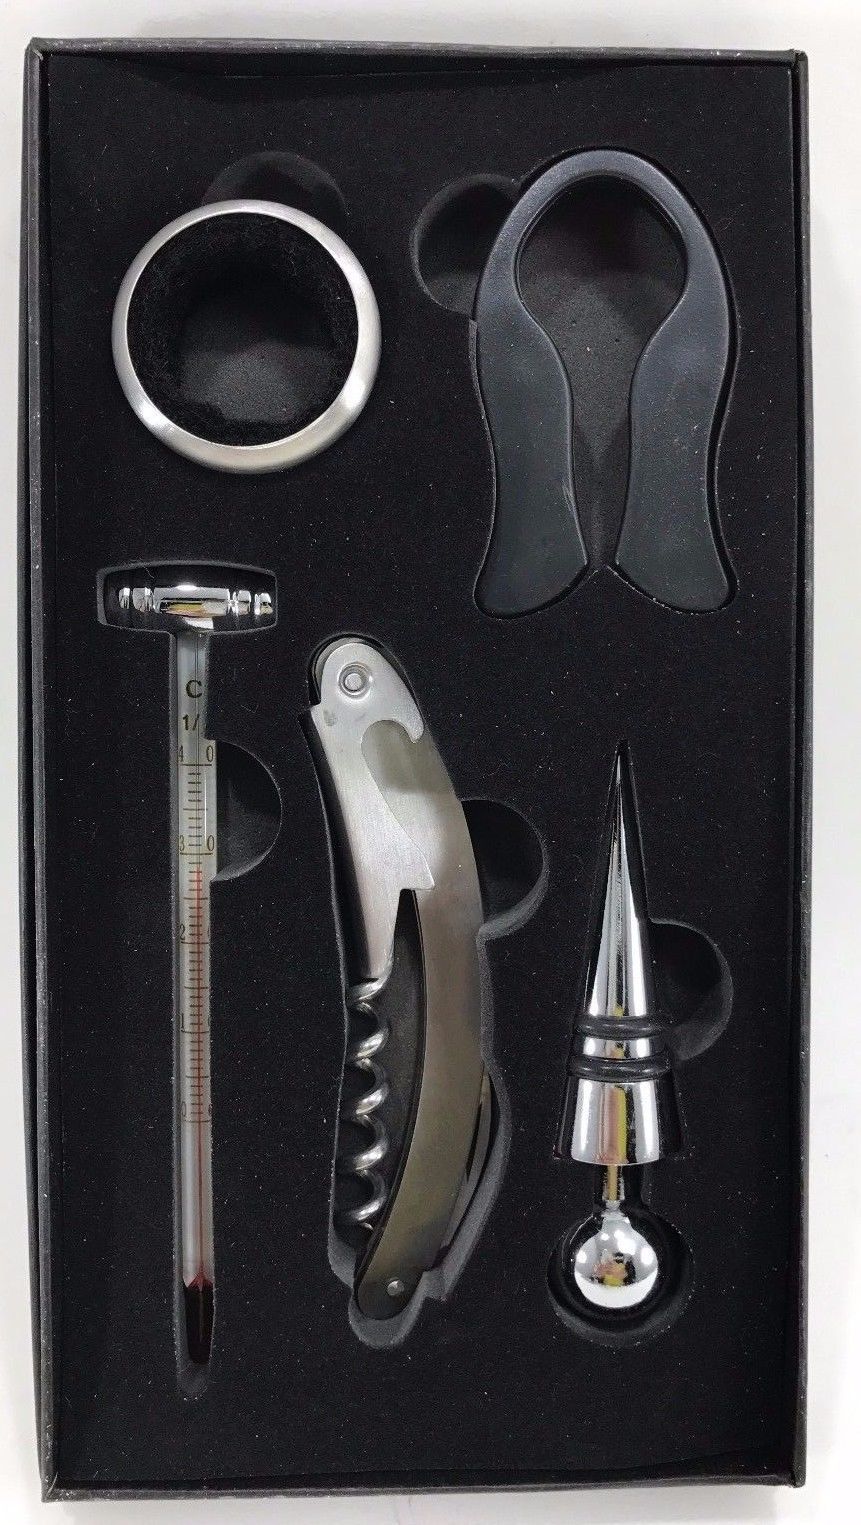 Rosewill - R-WS-001 - Wine Opening Set - $14.95